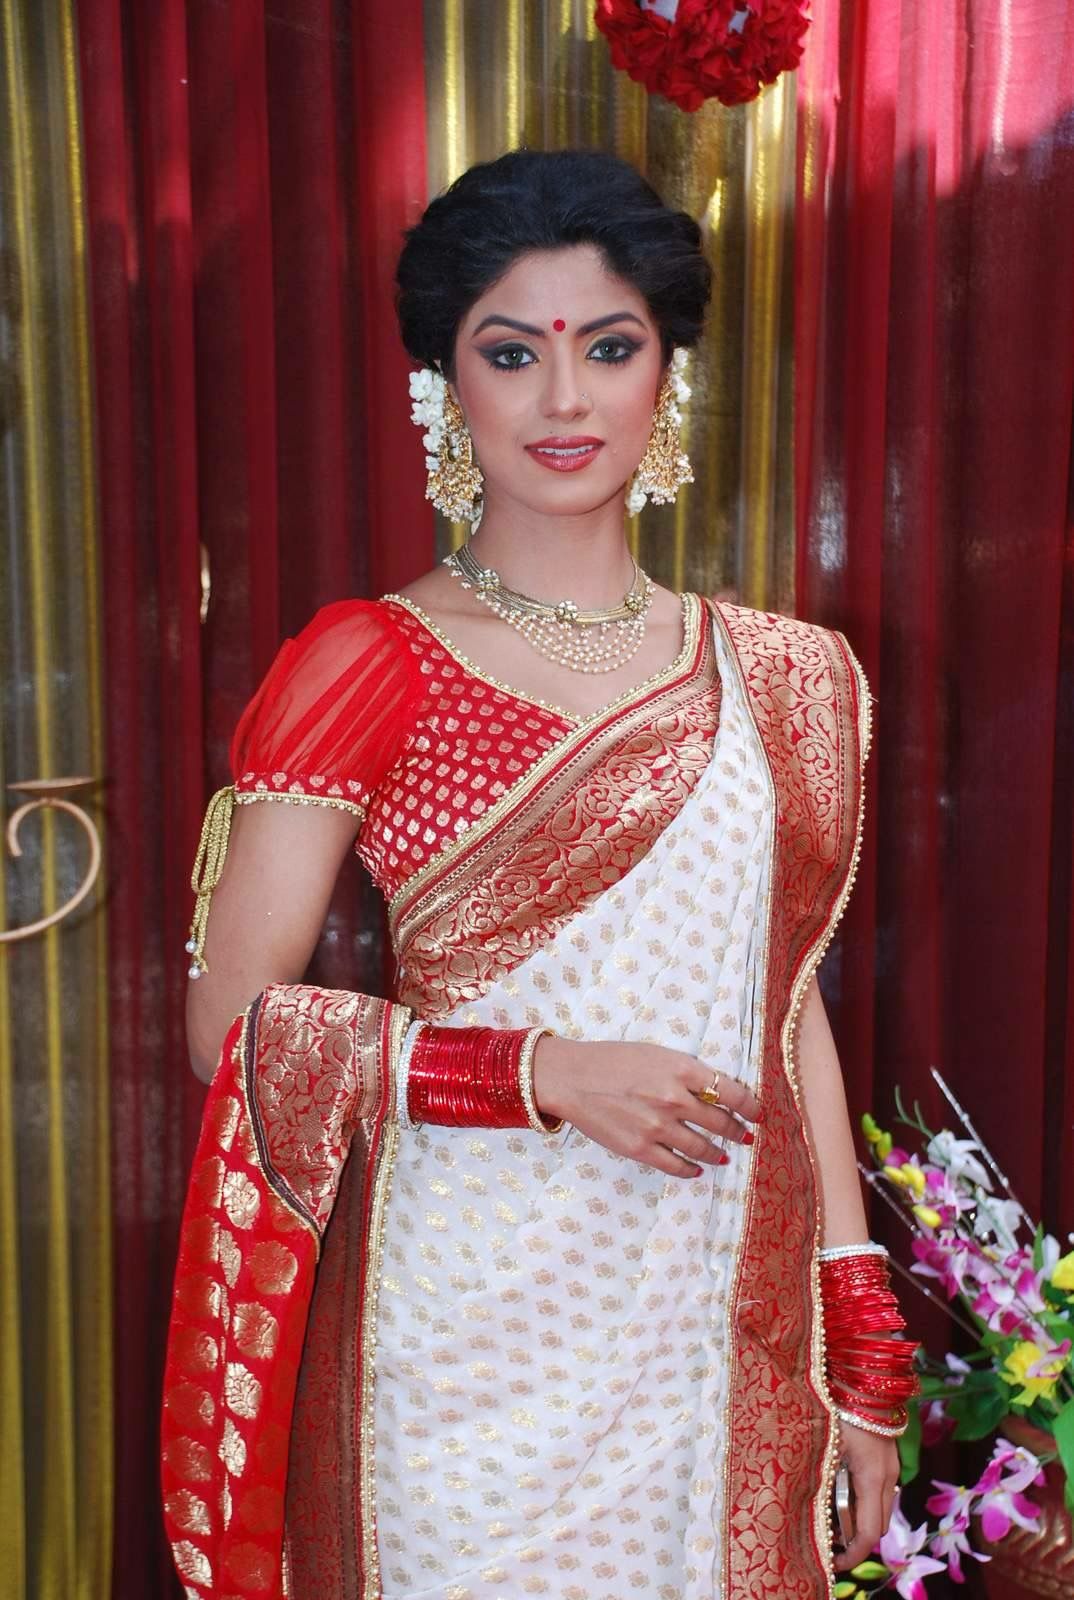 Most elegant cotton saree for a Bengali party look.